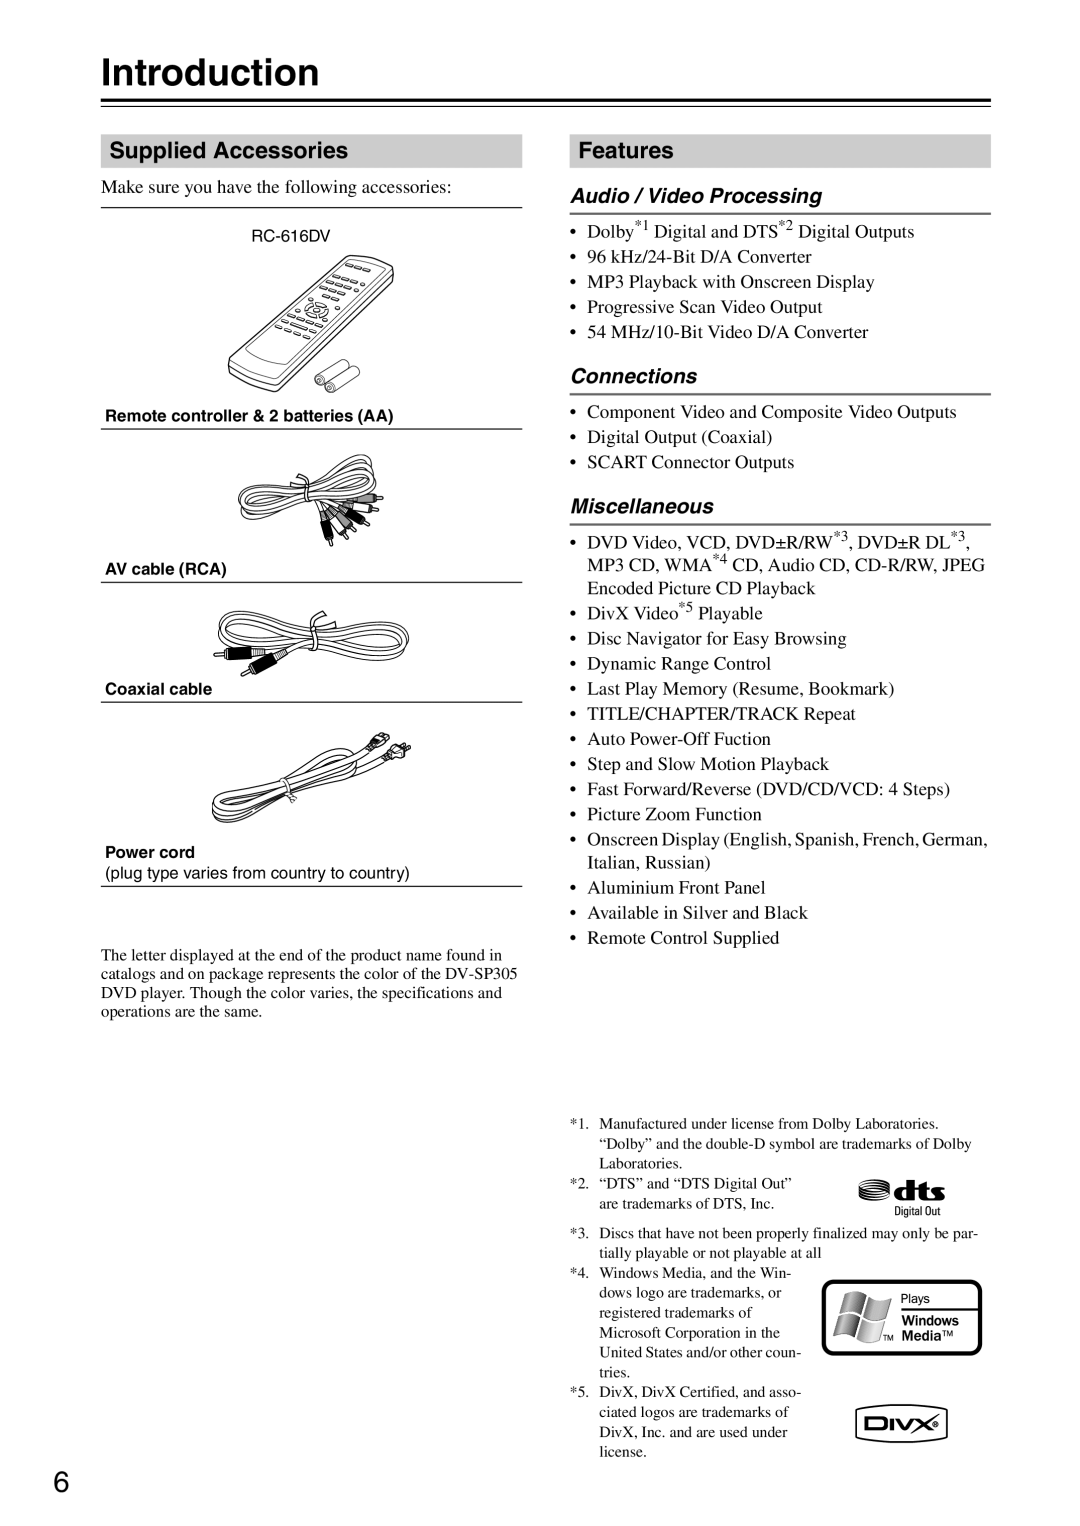 Onkyo DV-SP305 instruction manual Introduction, Supplied Accessories, Features 